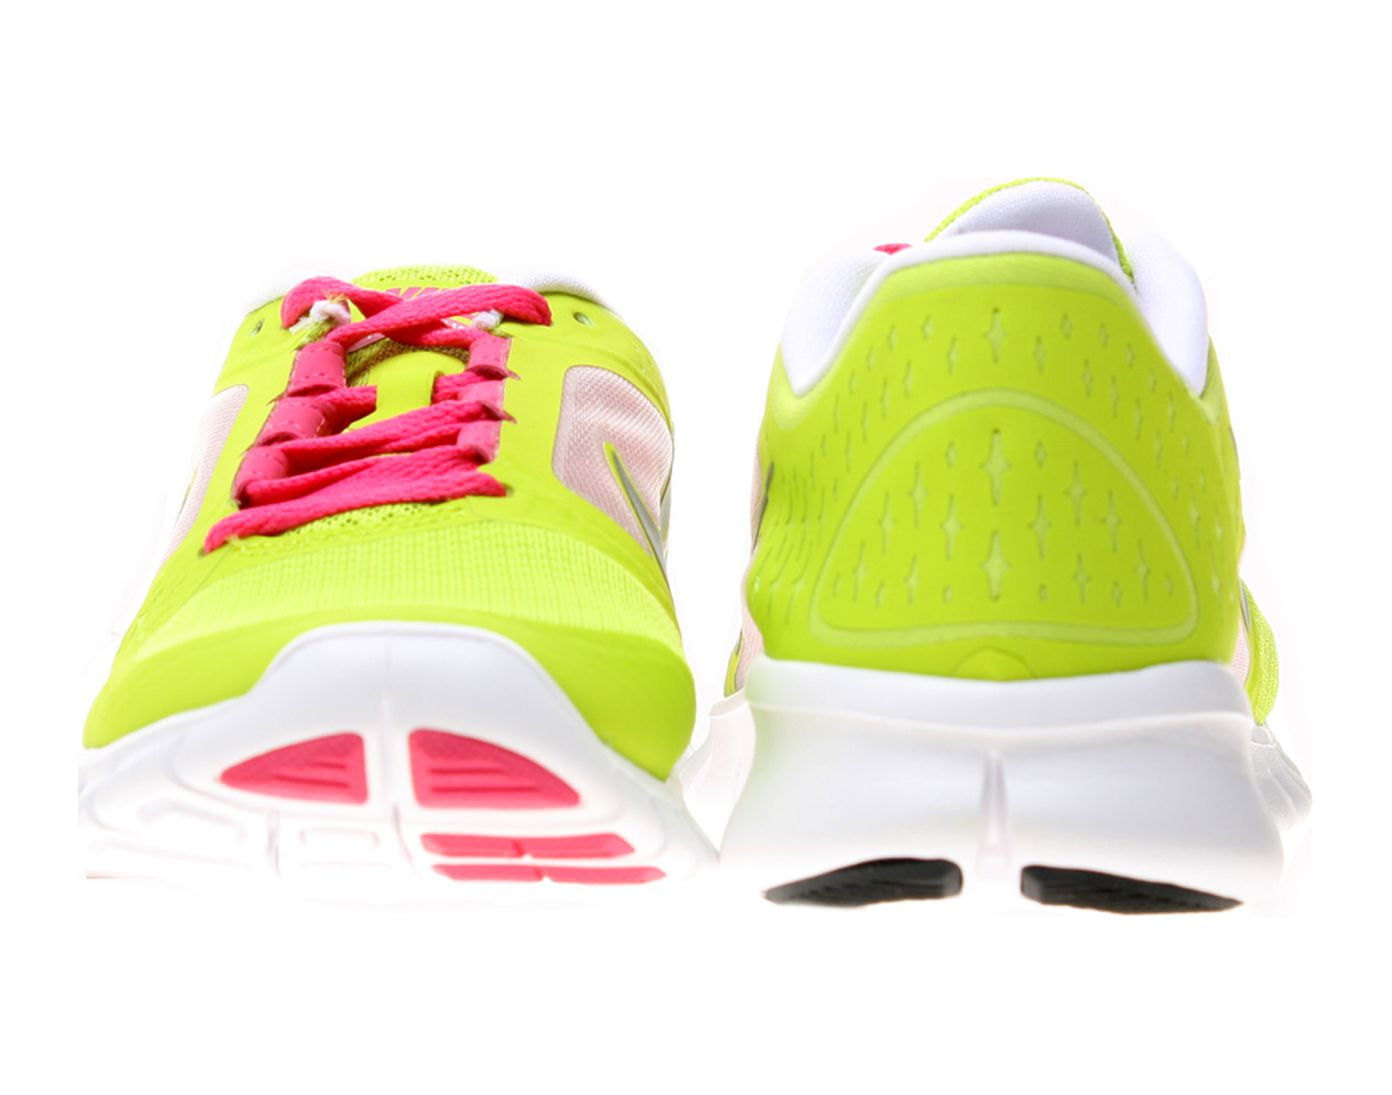 Udtale bøf Omkreds Nike Free Run 3 (GS) Girls' Running Shoes Size 7 - Walmart.com